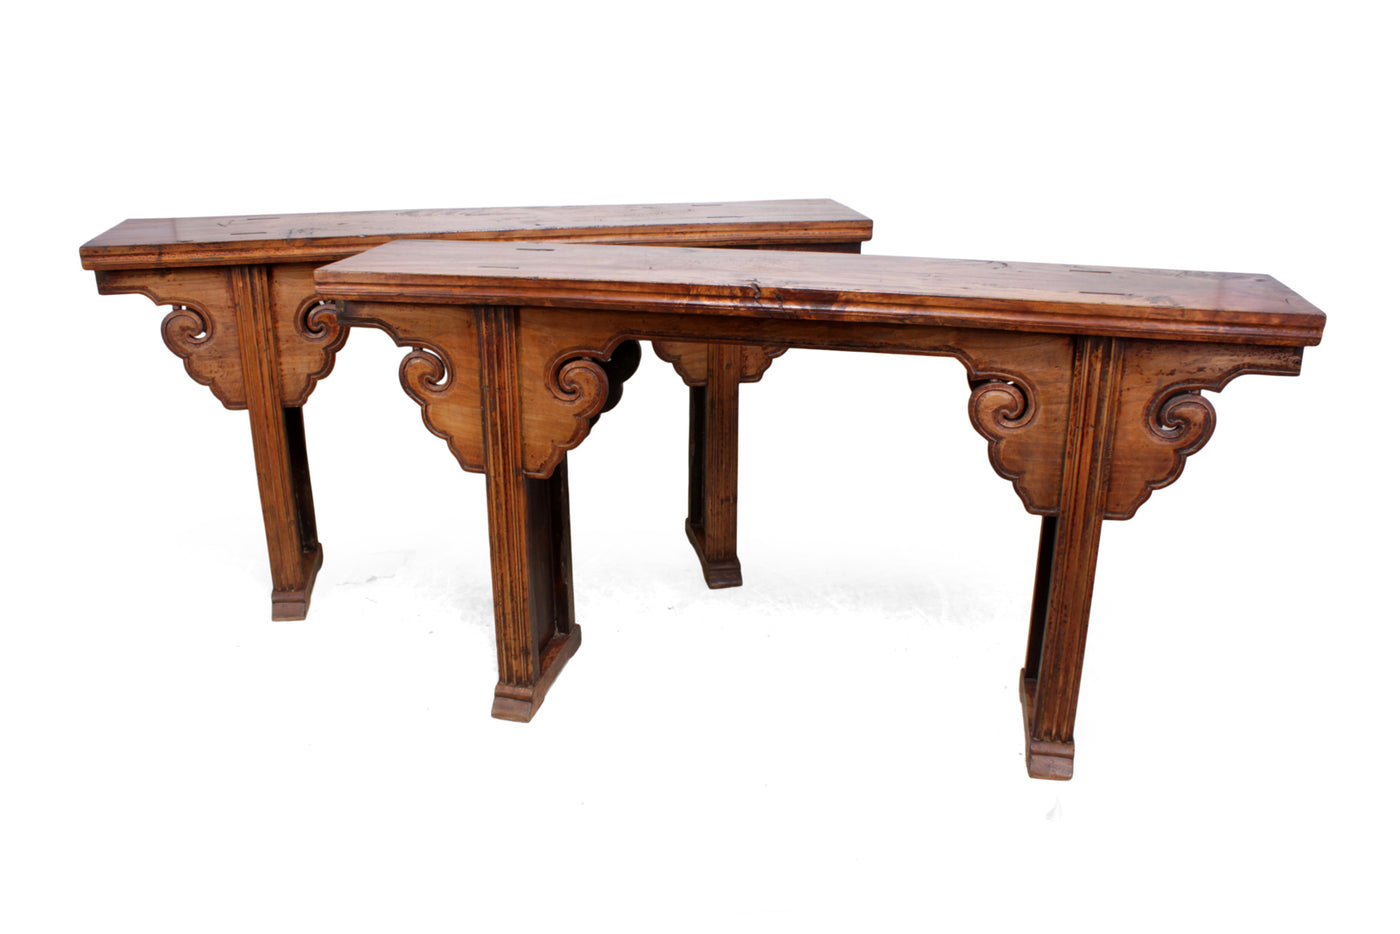 Pair of Elm Alter Tables from Northern China